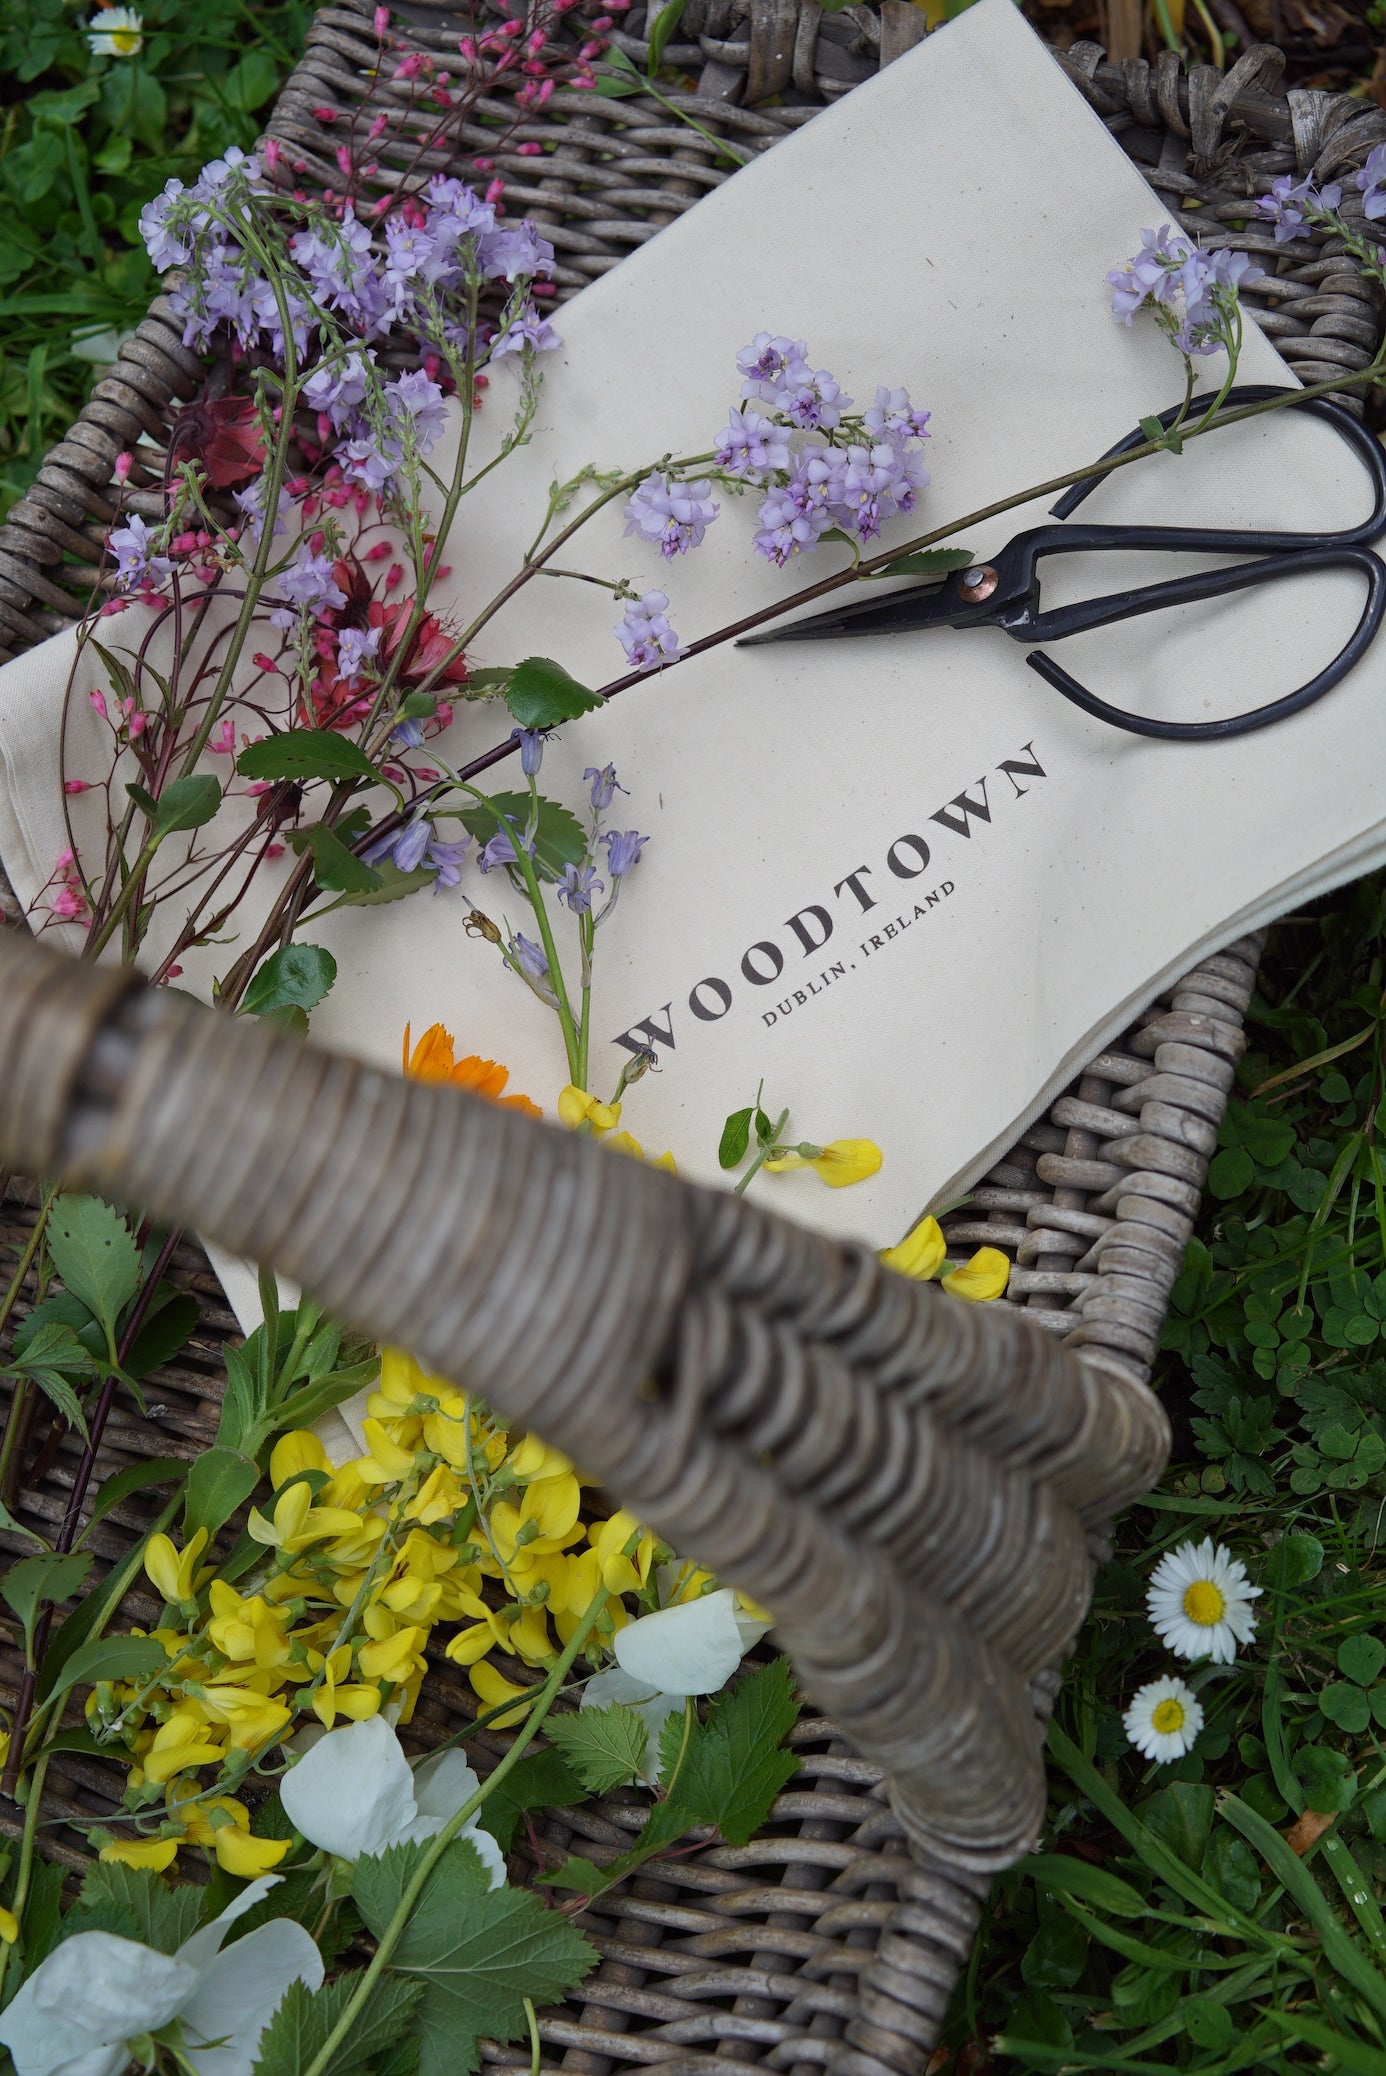 top down image of a woven basket with a cotton Woodtown branded bag, black scissors, and foraged picked garden flowers laid in it